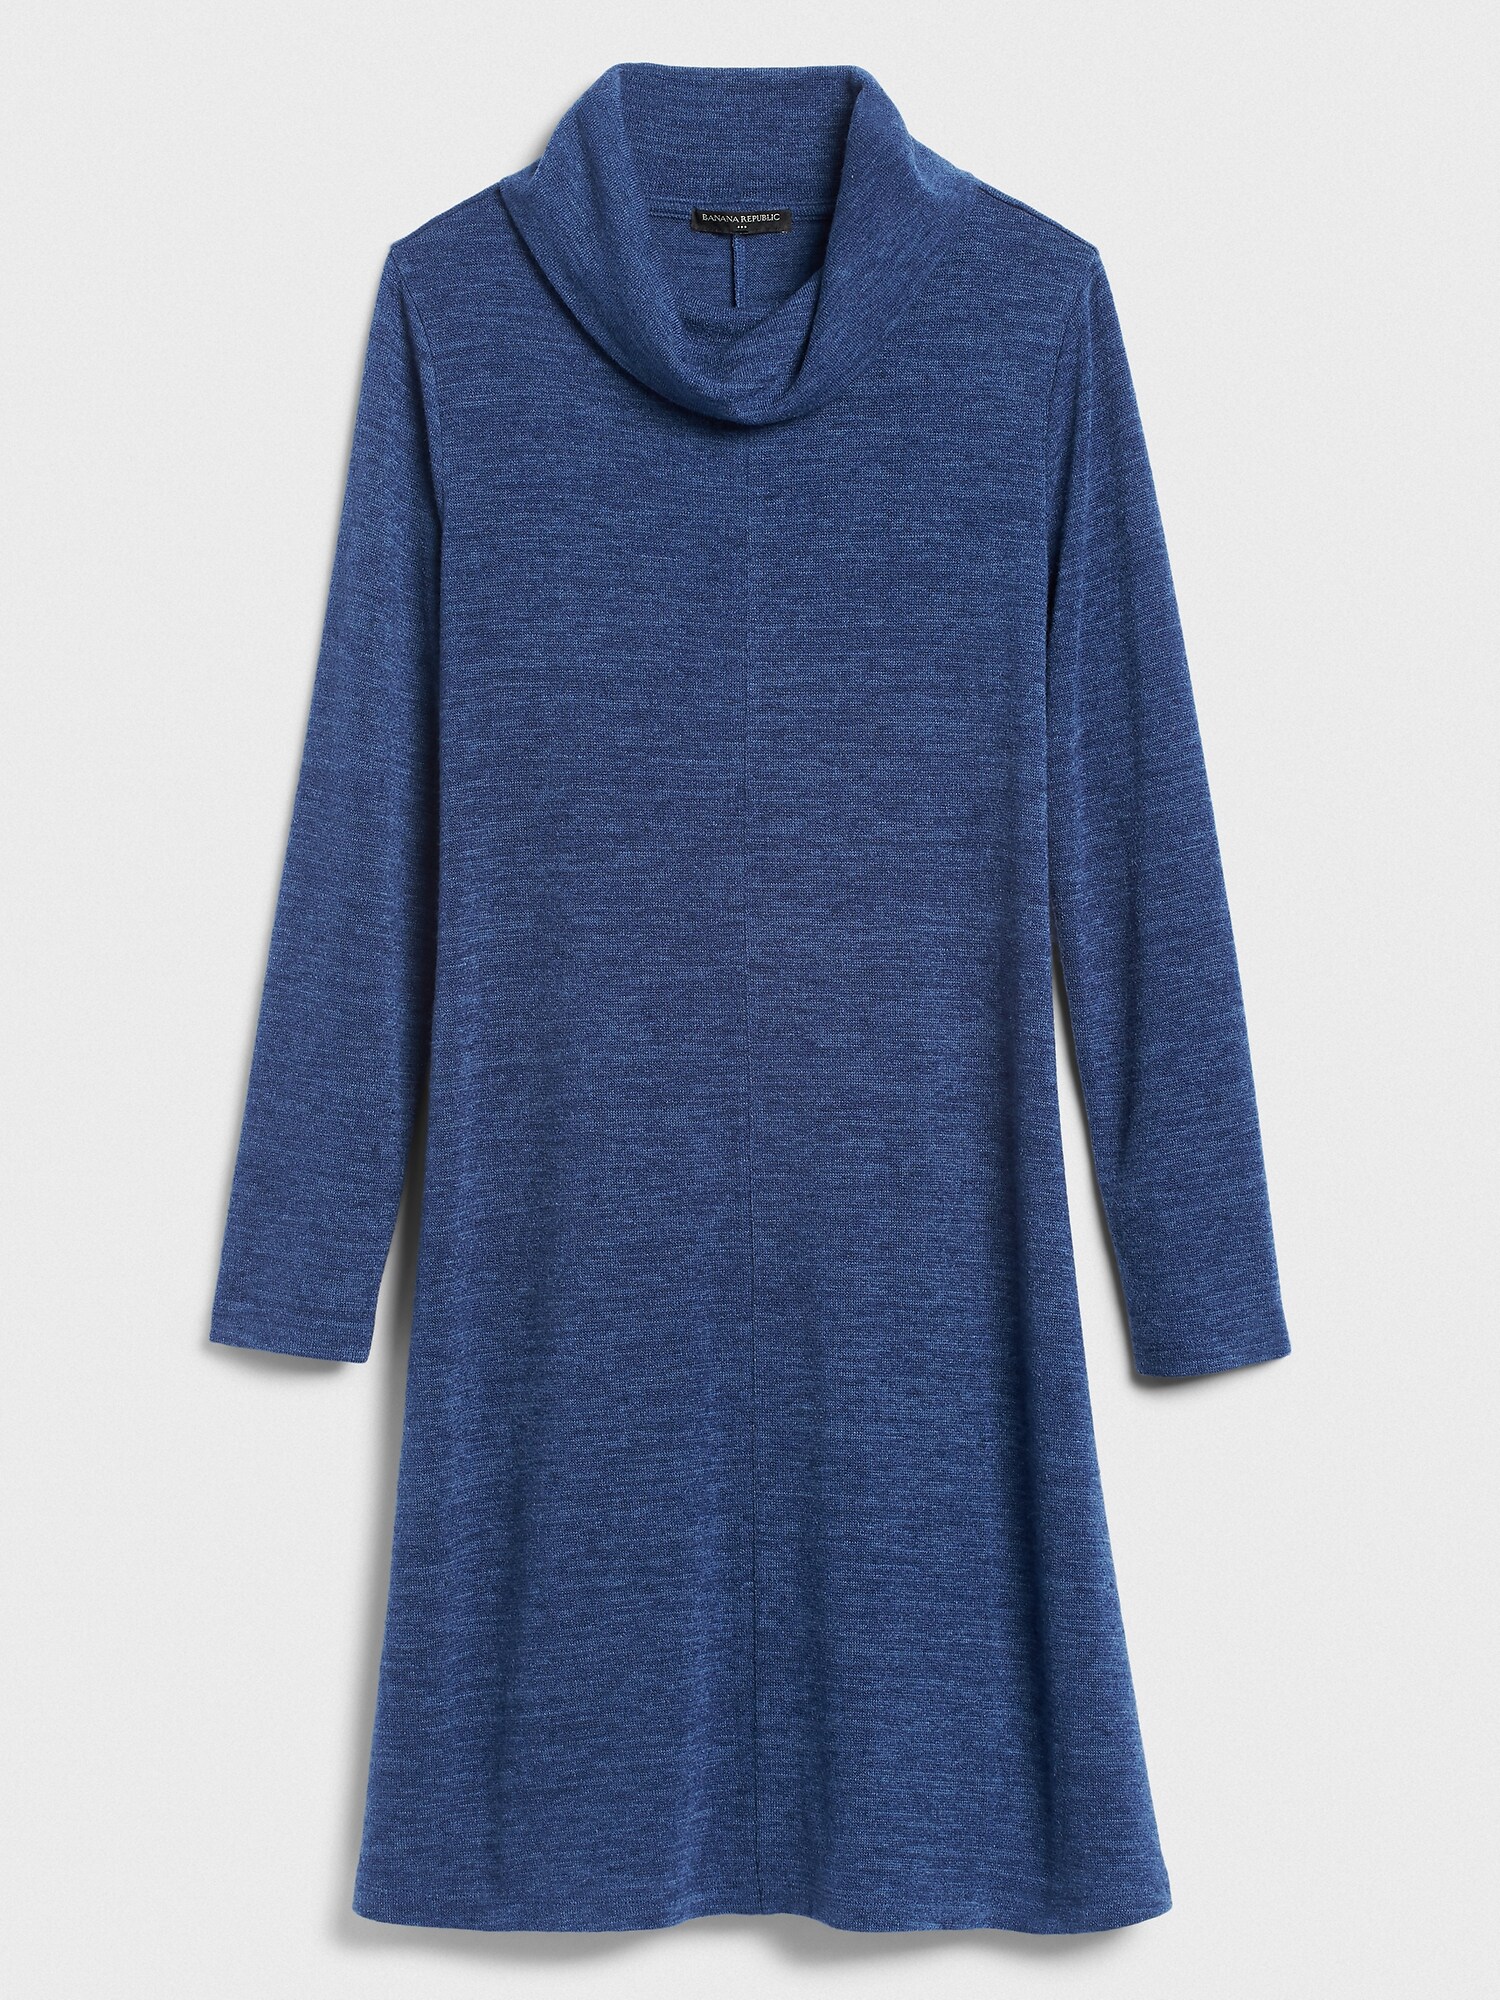 Petite Cozy Cowl-Neck Fit-and-Flare Sweater Dress